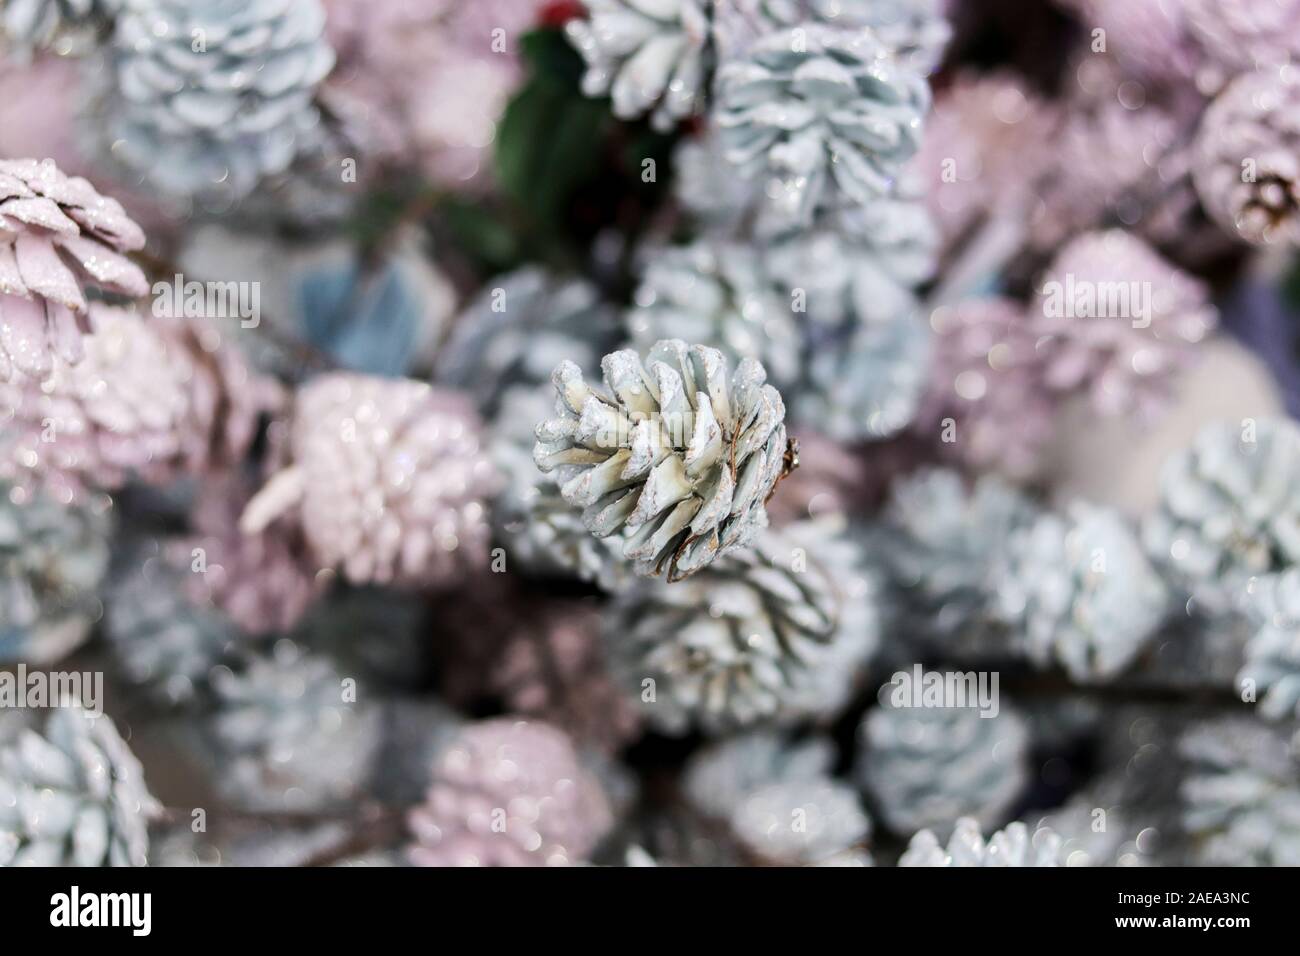 Defocused Christmas background filled of pastel colors painted pinecones for xmas tree decoration. Stock Photo